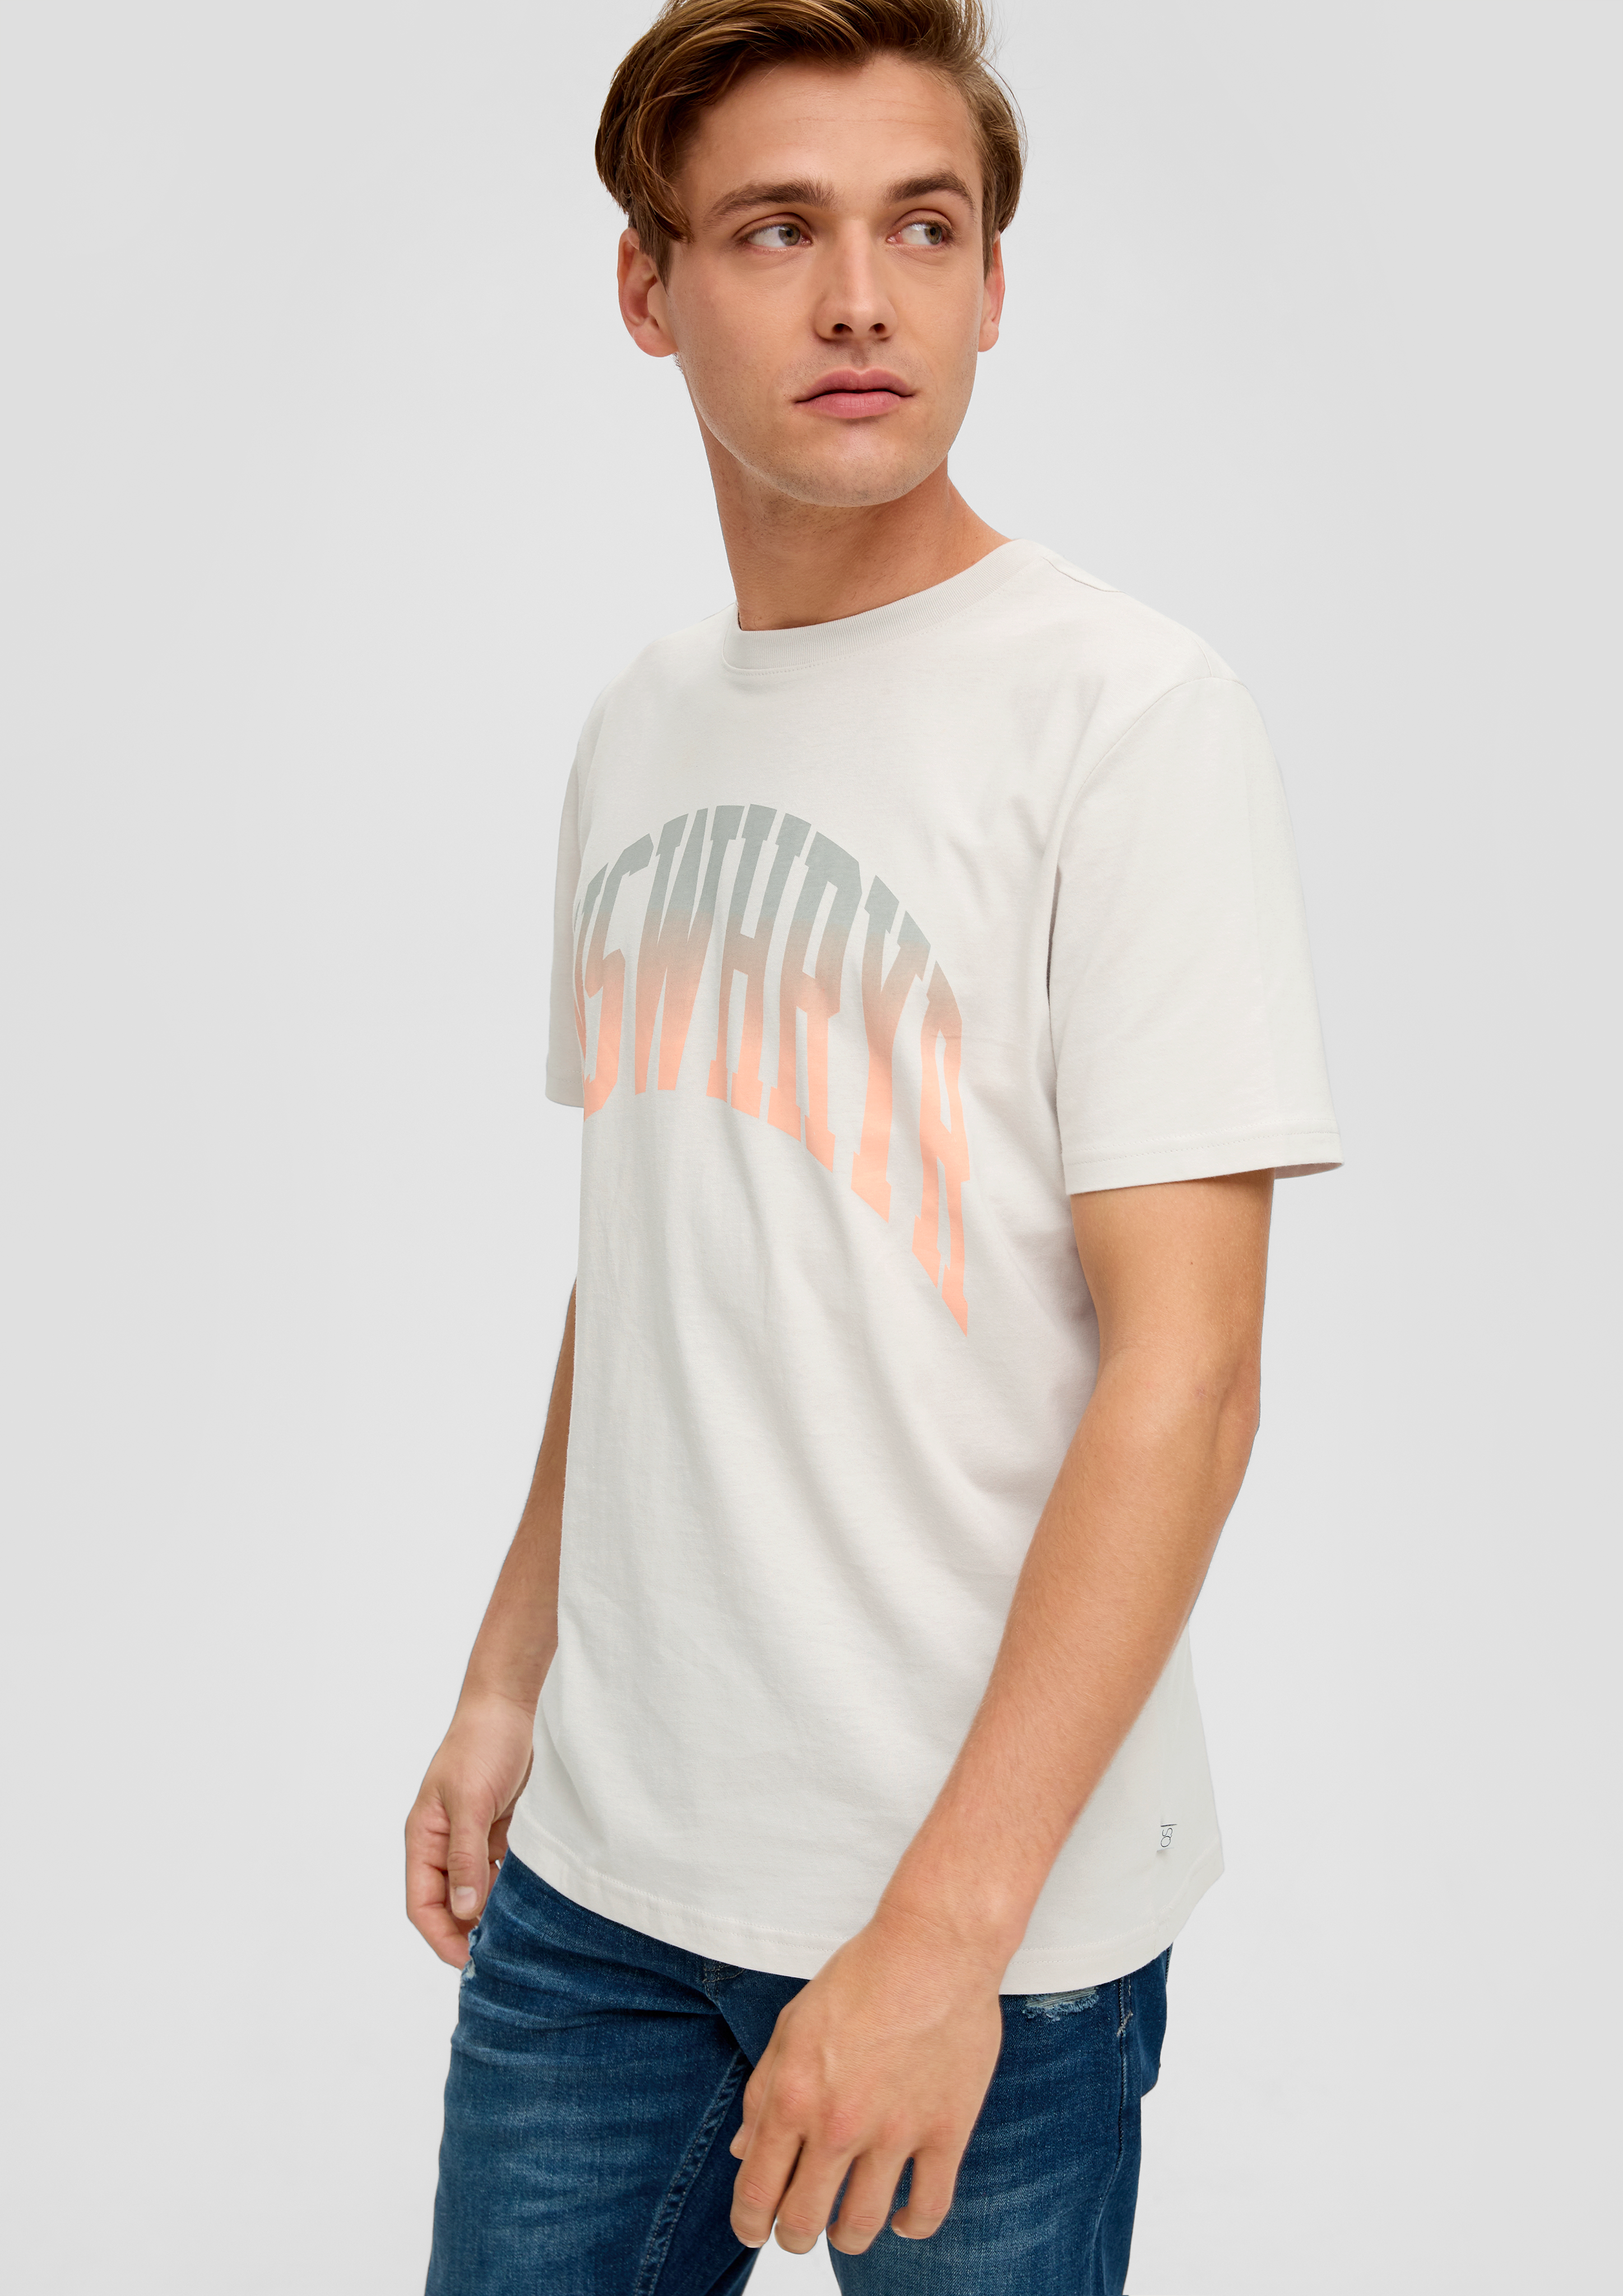 - with offwhite print a front T-shirt